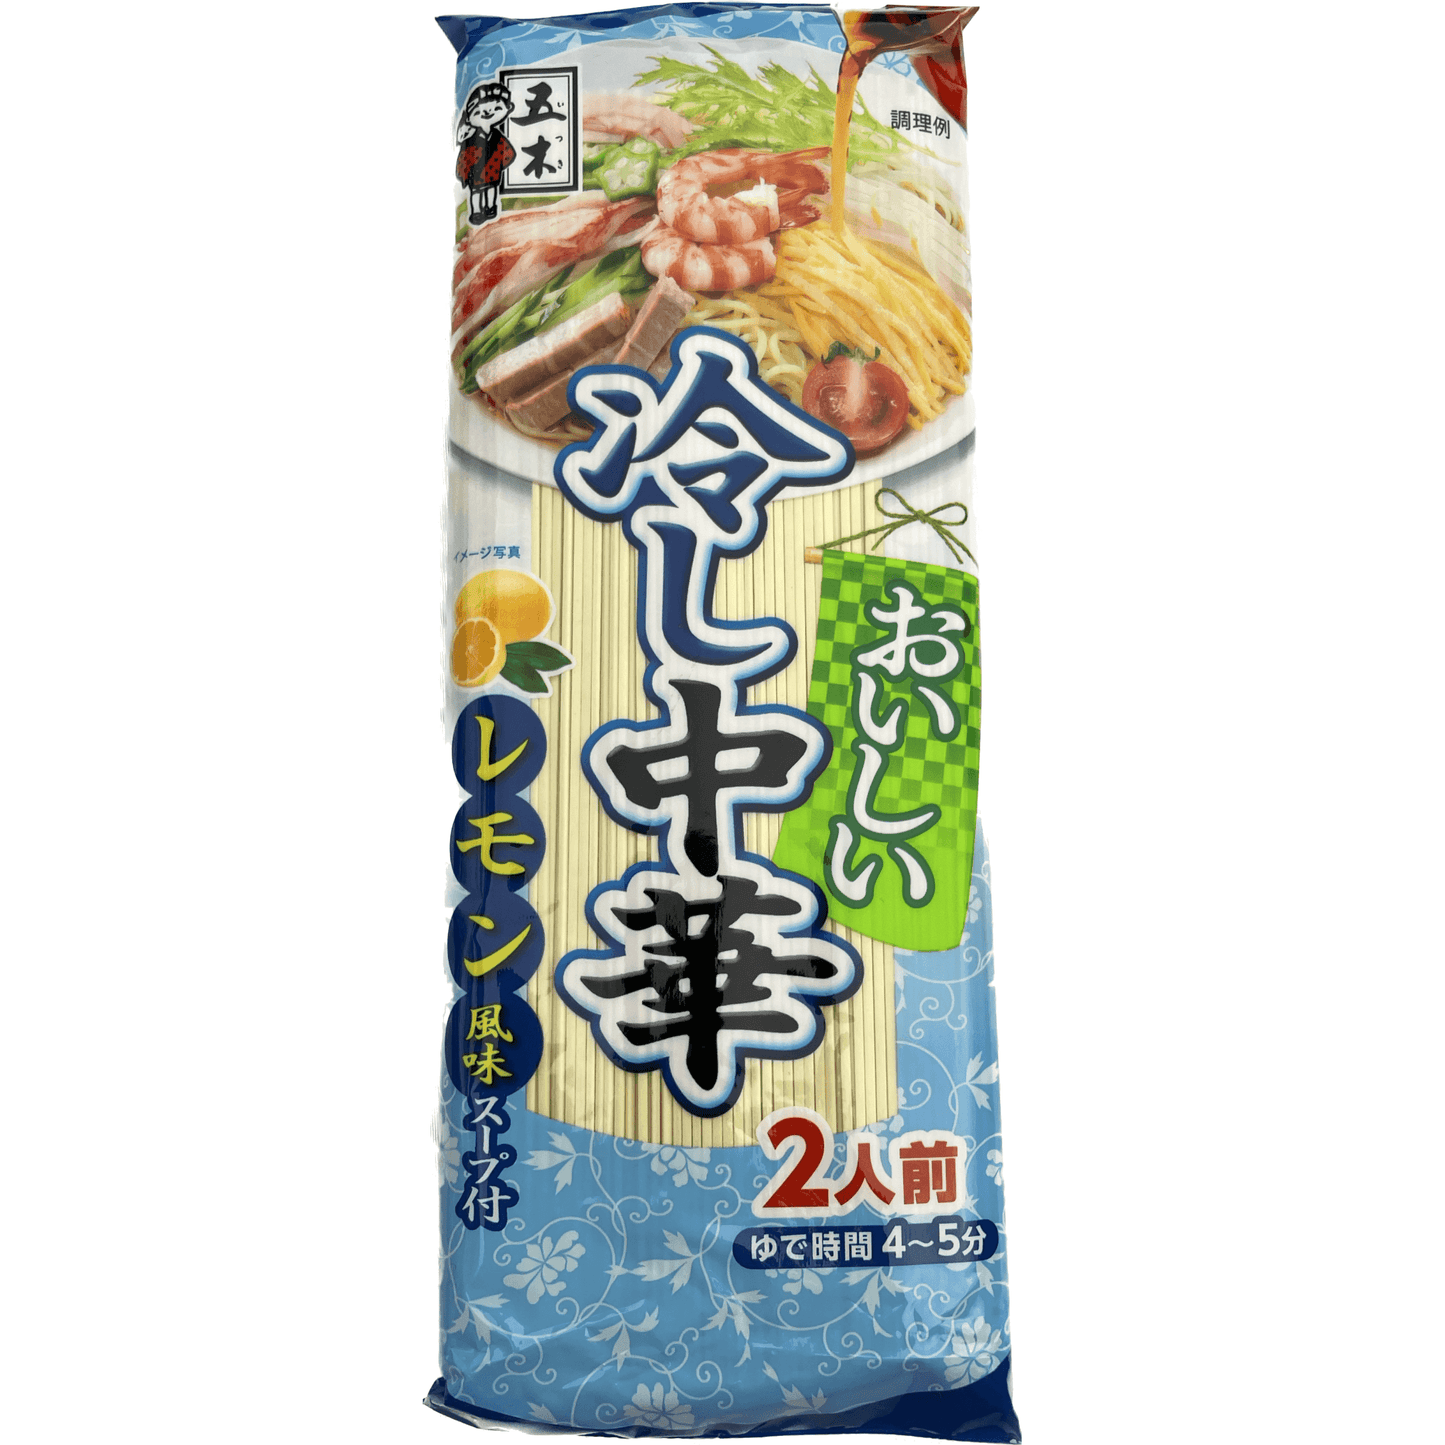 Itsuki Delicious Chilled Chinese Noodles Lemon Flavor (serves 2 people) 五木　おいしい冷し中華　レモン風味　2人前 - RiceWineShop